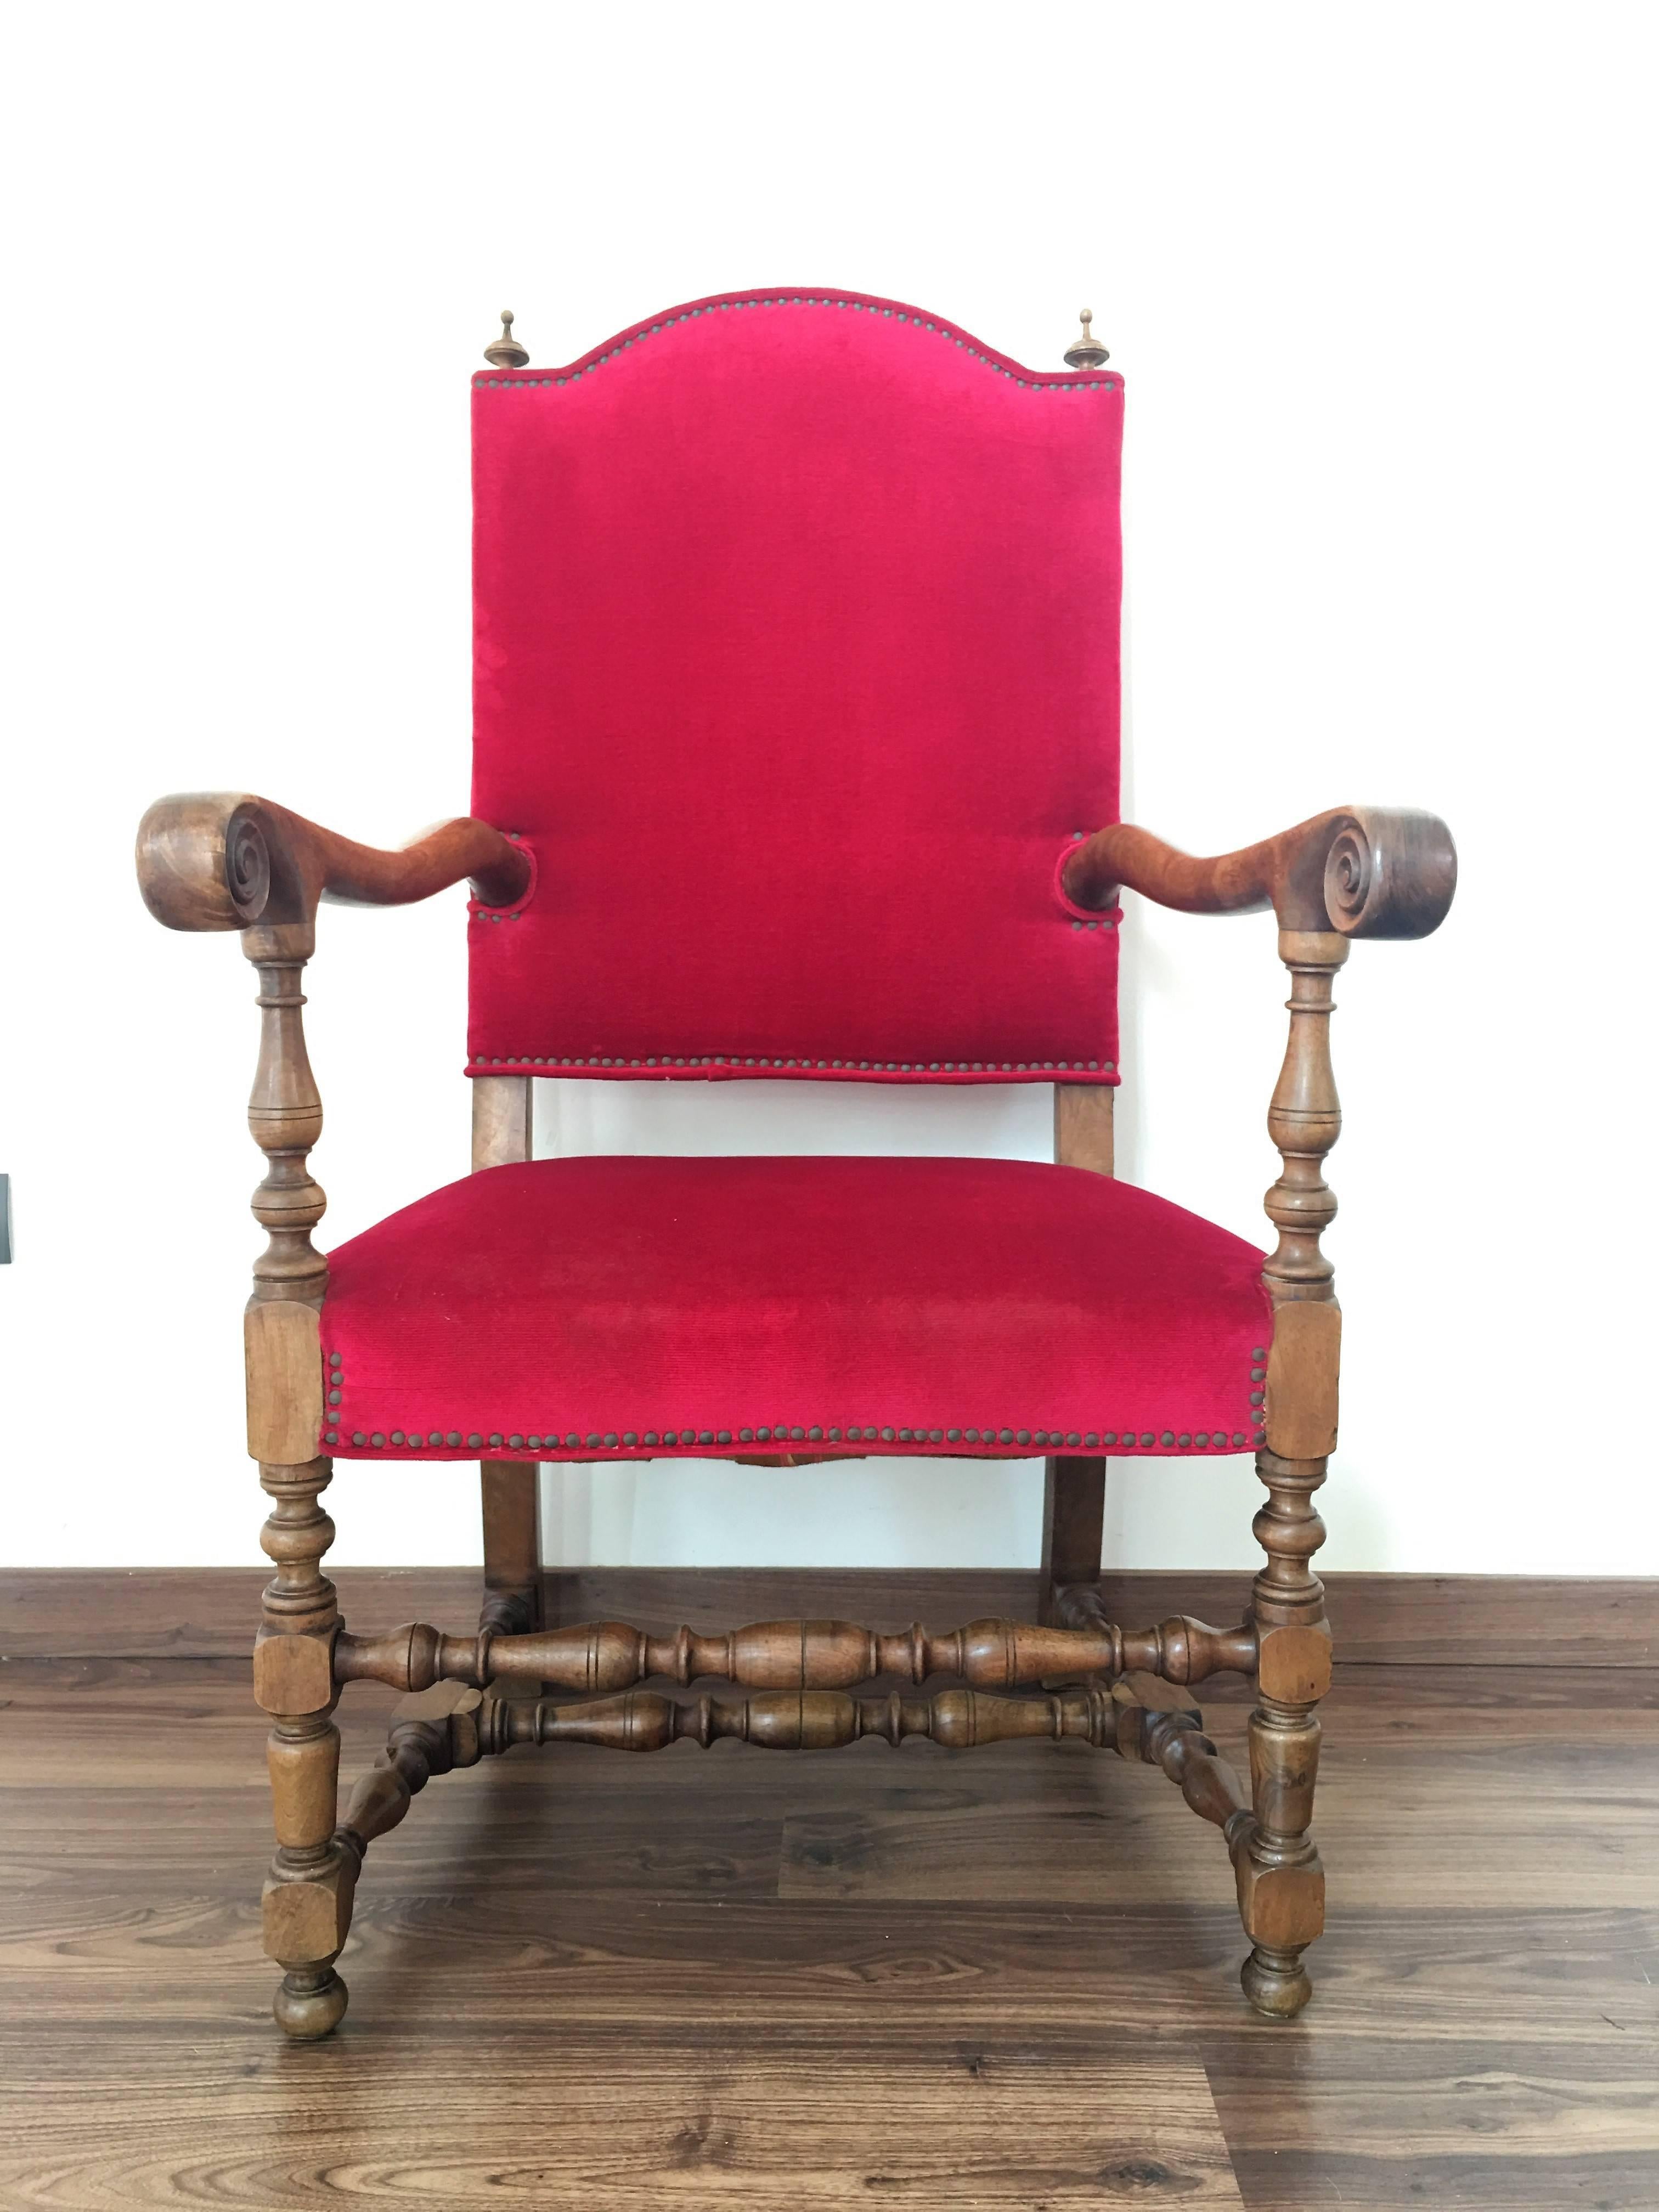 19th century Louis XIII style fauteuils throne armchair in red velvet

Carved style walnut armchair

Completely restored

